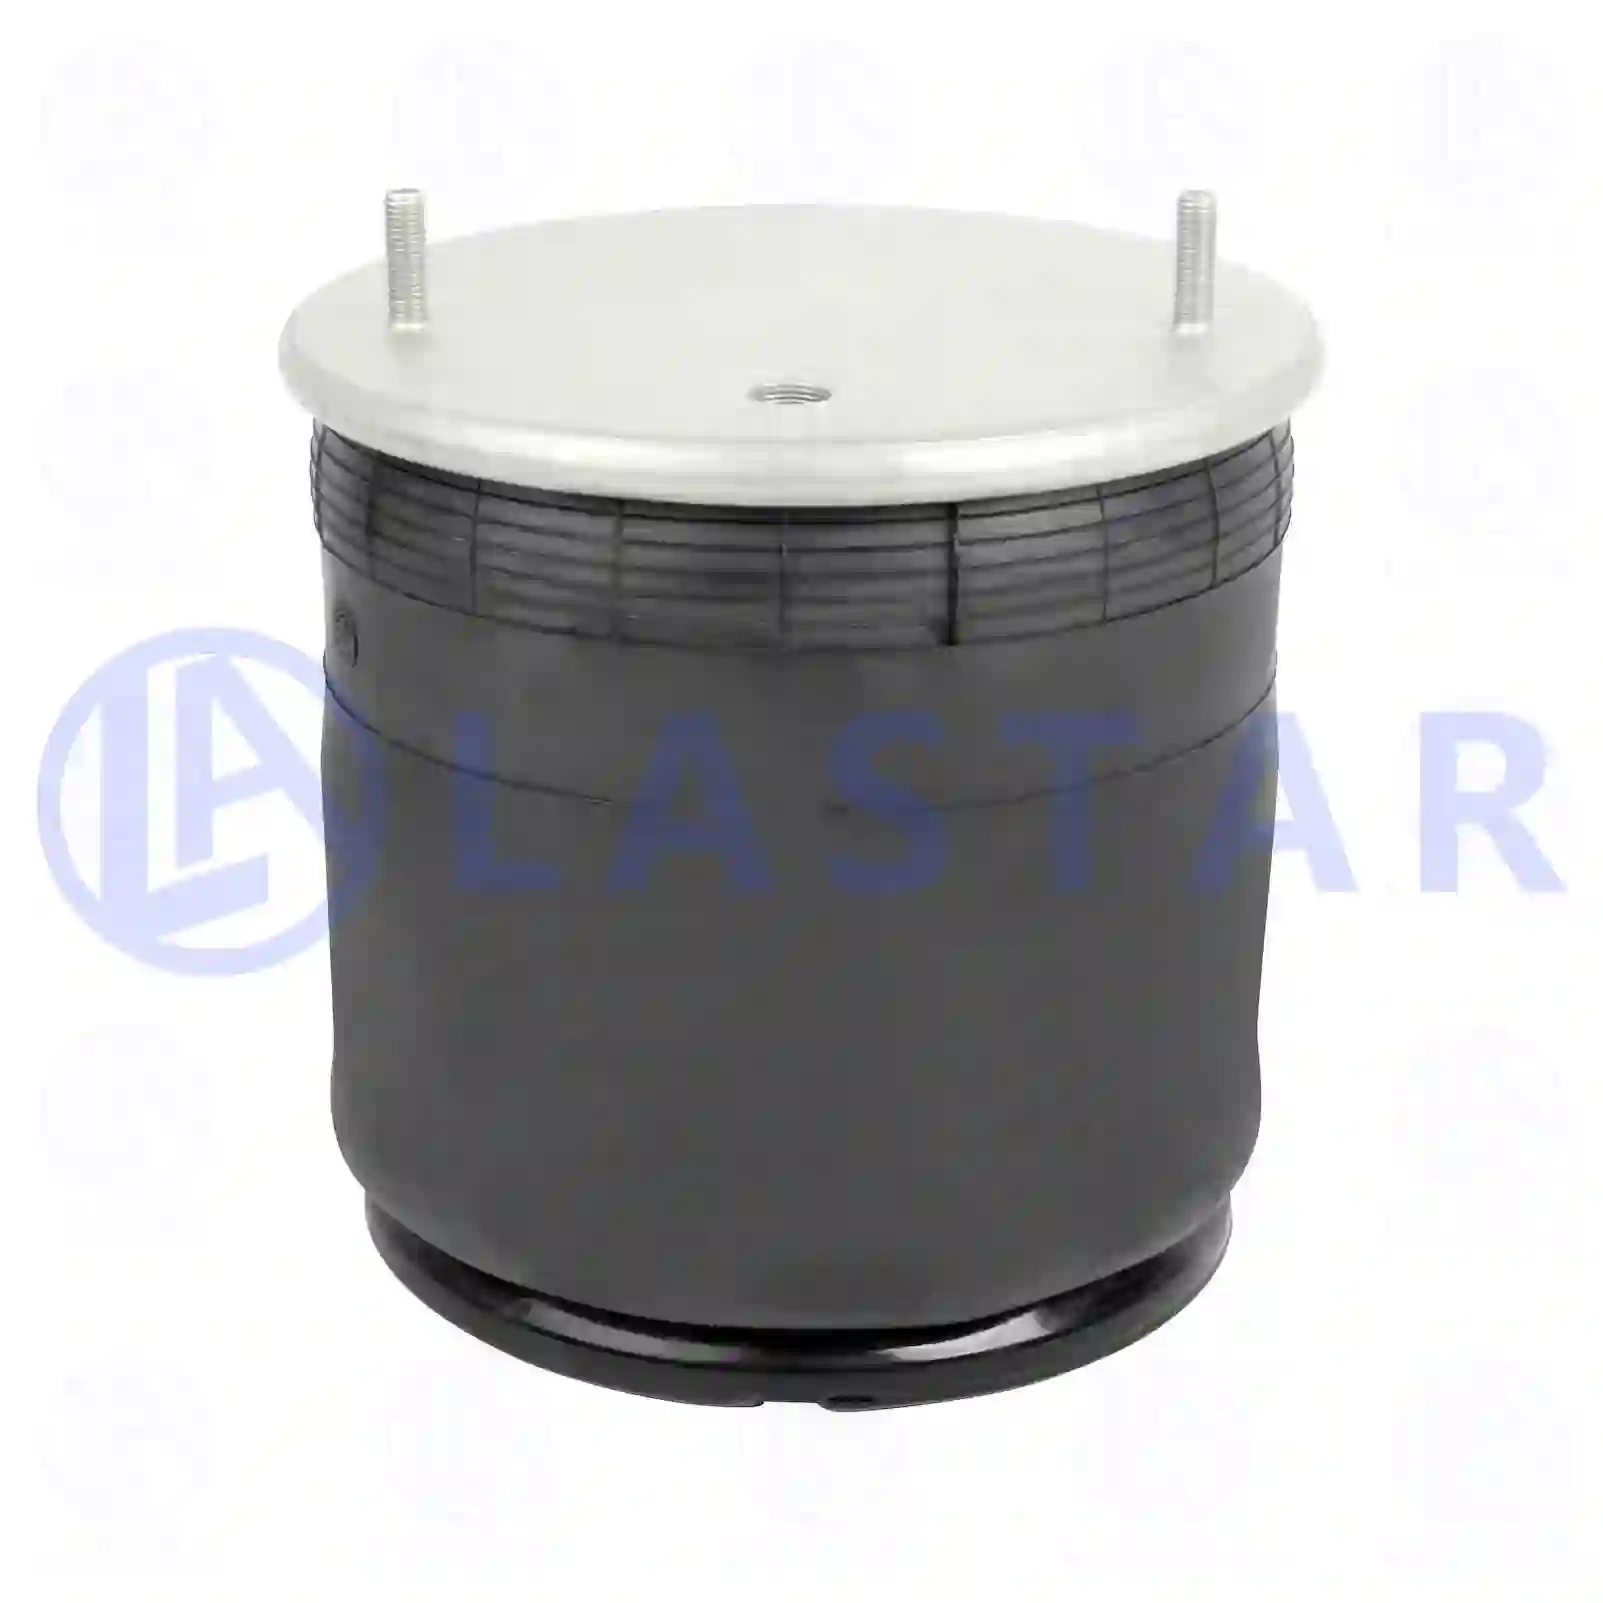 Air spring, with steel piston, 77728192, JAE2010501901, JAS2010501901, 9463281901, ZG40773-0008, , ||  77728192 Lastar Spare Part | Truck Spare Parts, Auotomotive Spare Parts Air spring, with steel piston, 77728192, JAE2010501901, JAS2010501901, 9463281901, ZG40773-0008, , ||  77728192 Lastar Spare Part | Truck Spare Parts, Auotomotive Spare Parts